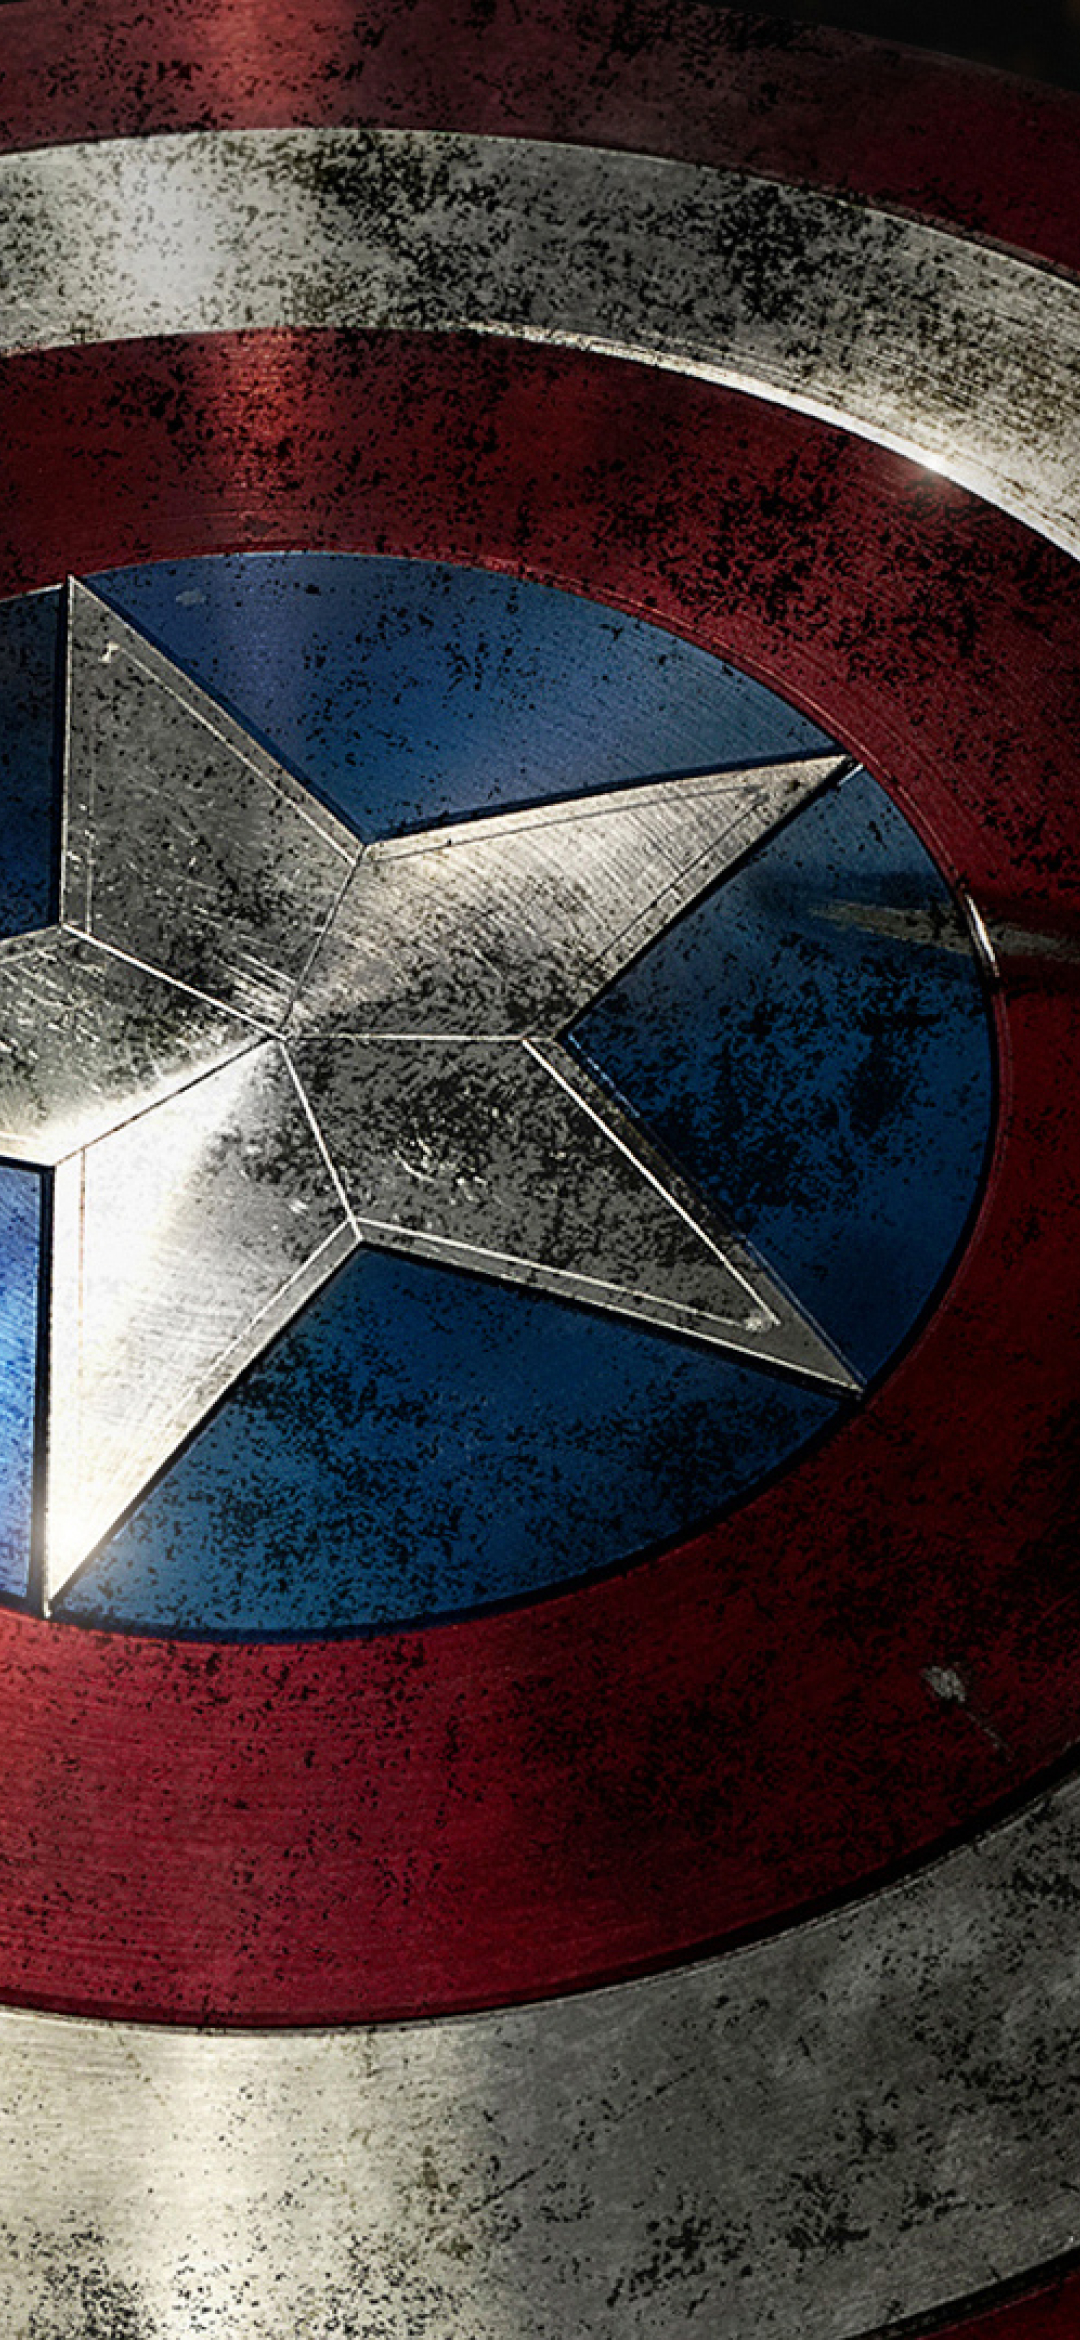 1080x2340 Captain America Shield Wallpapers 1080x2340 Resolution Wallpaper Hd Movies 4k Wallpapers Images Photos And Background